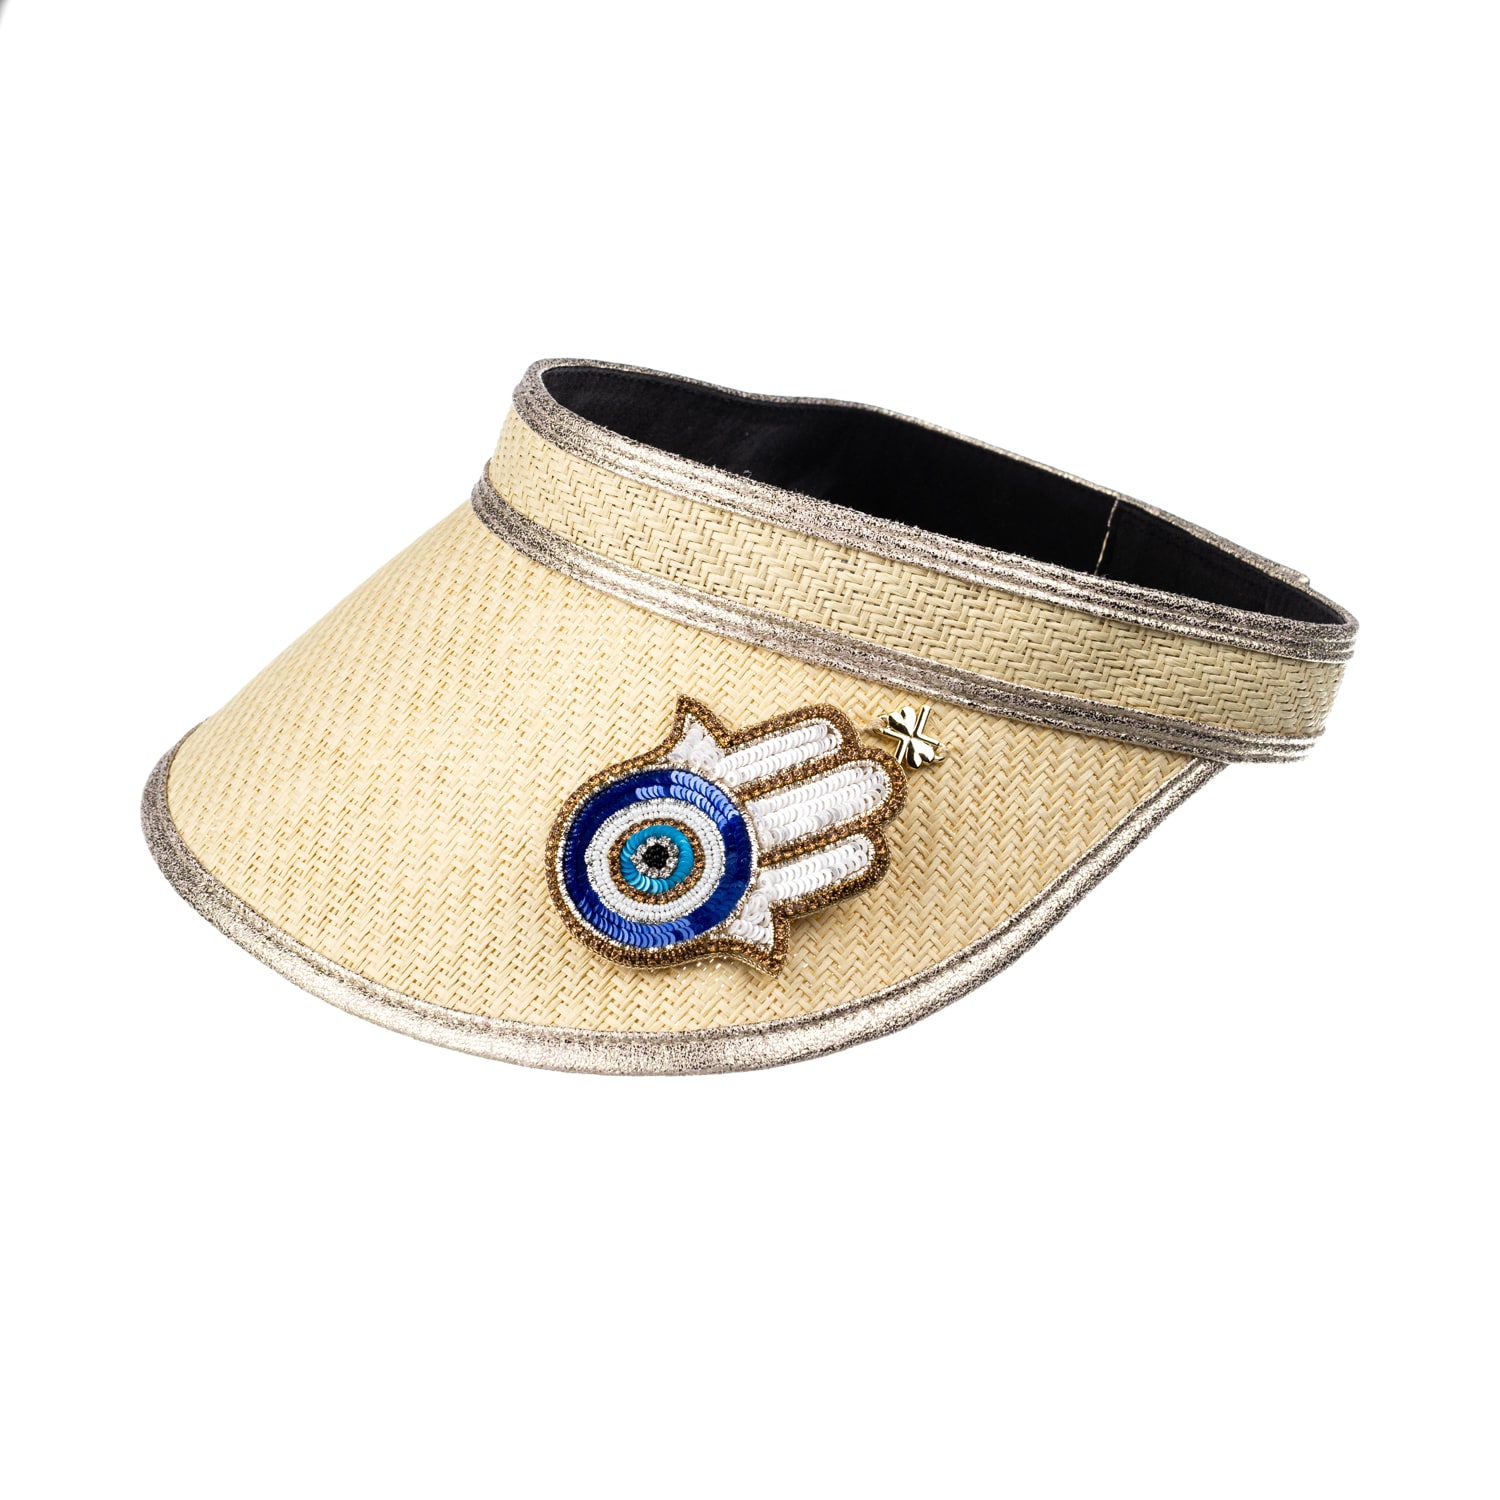 Women’s Neutrals Straw Woven Visor With Embellished Hamsa Hand Brooch - Cream One Size Laines London